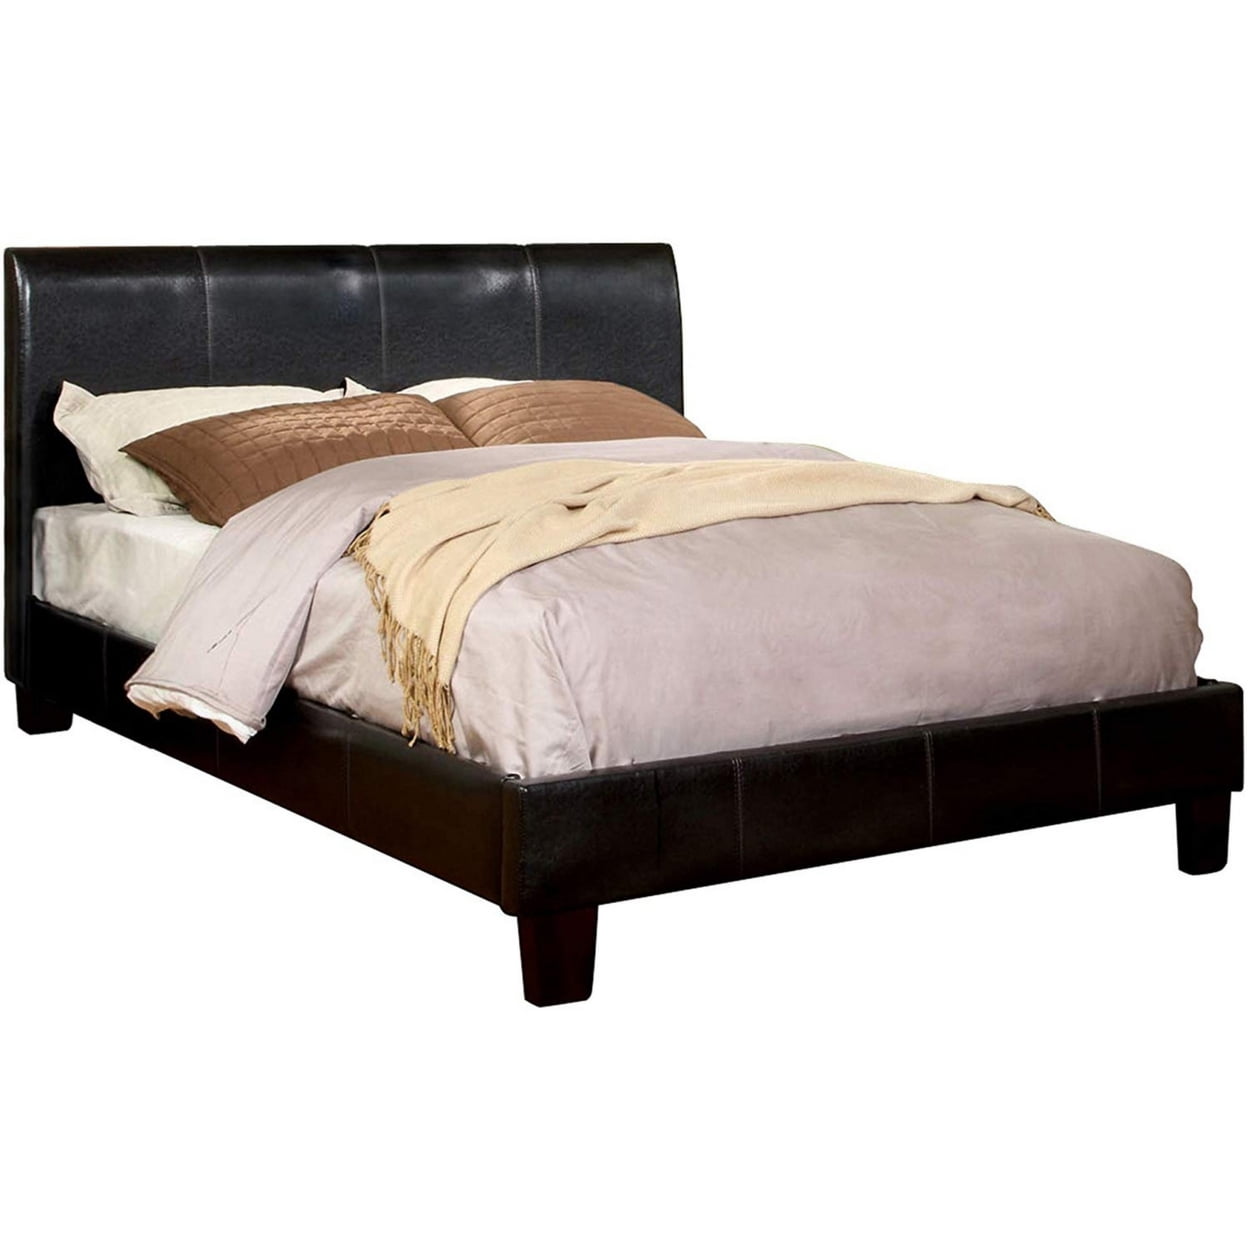 BM217668 Platform Style Leatherette Bed with Curved Headboard, Brown - Queen Size -  Benjara